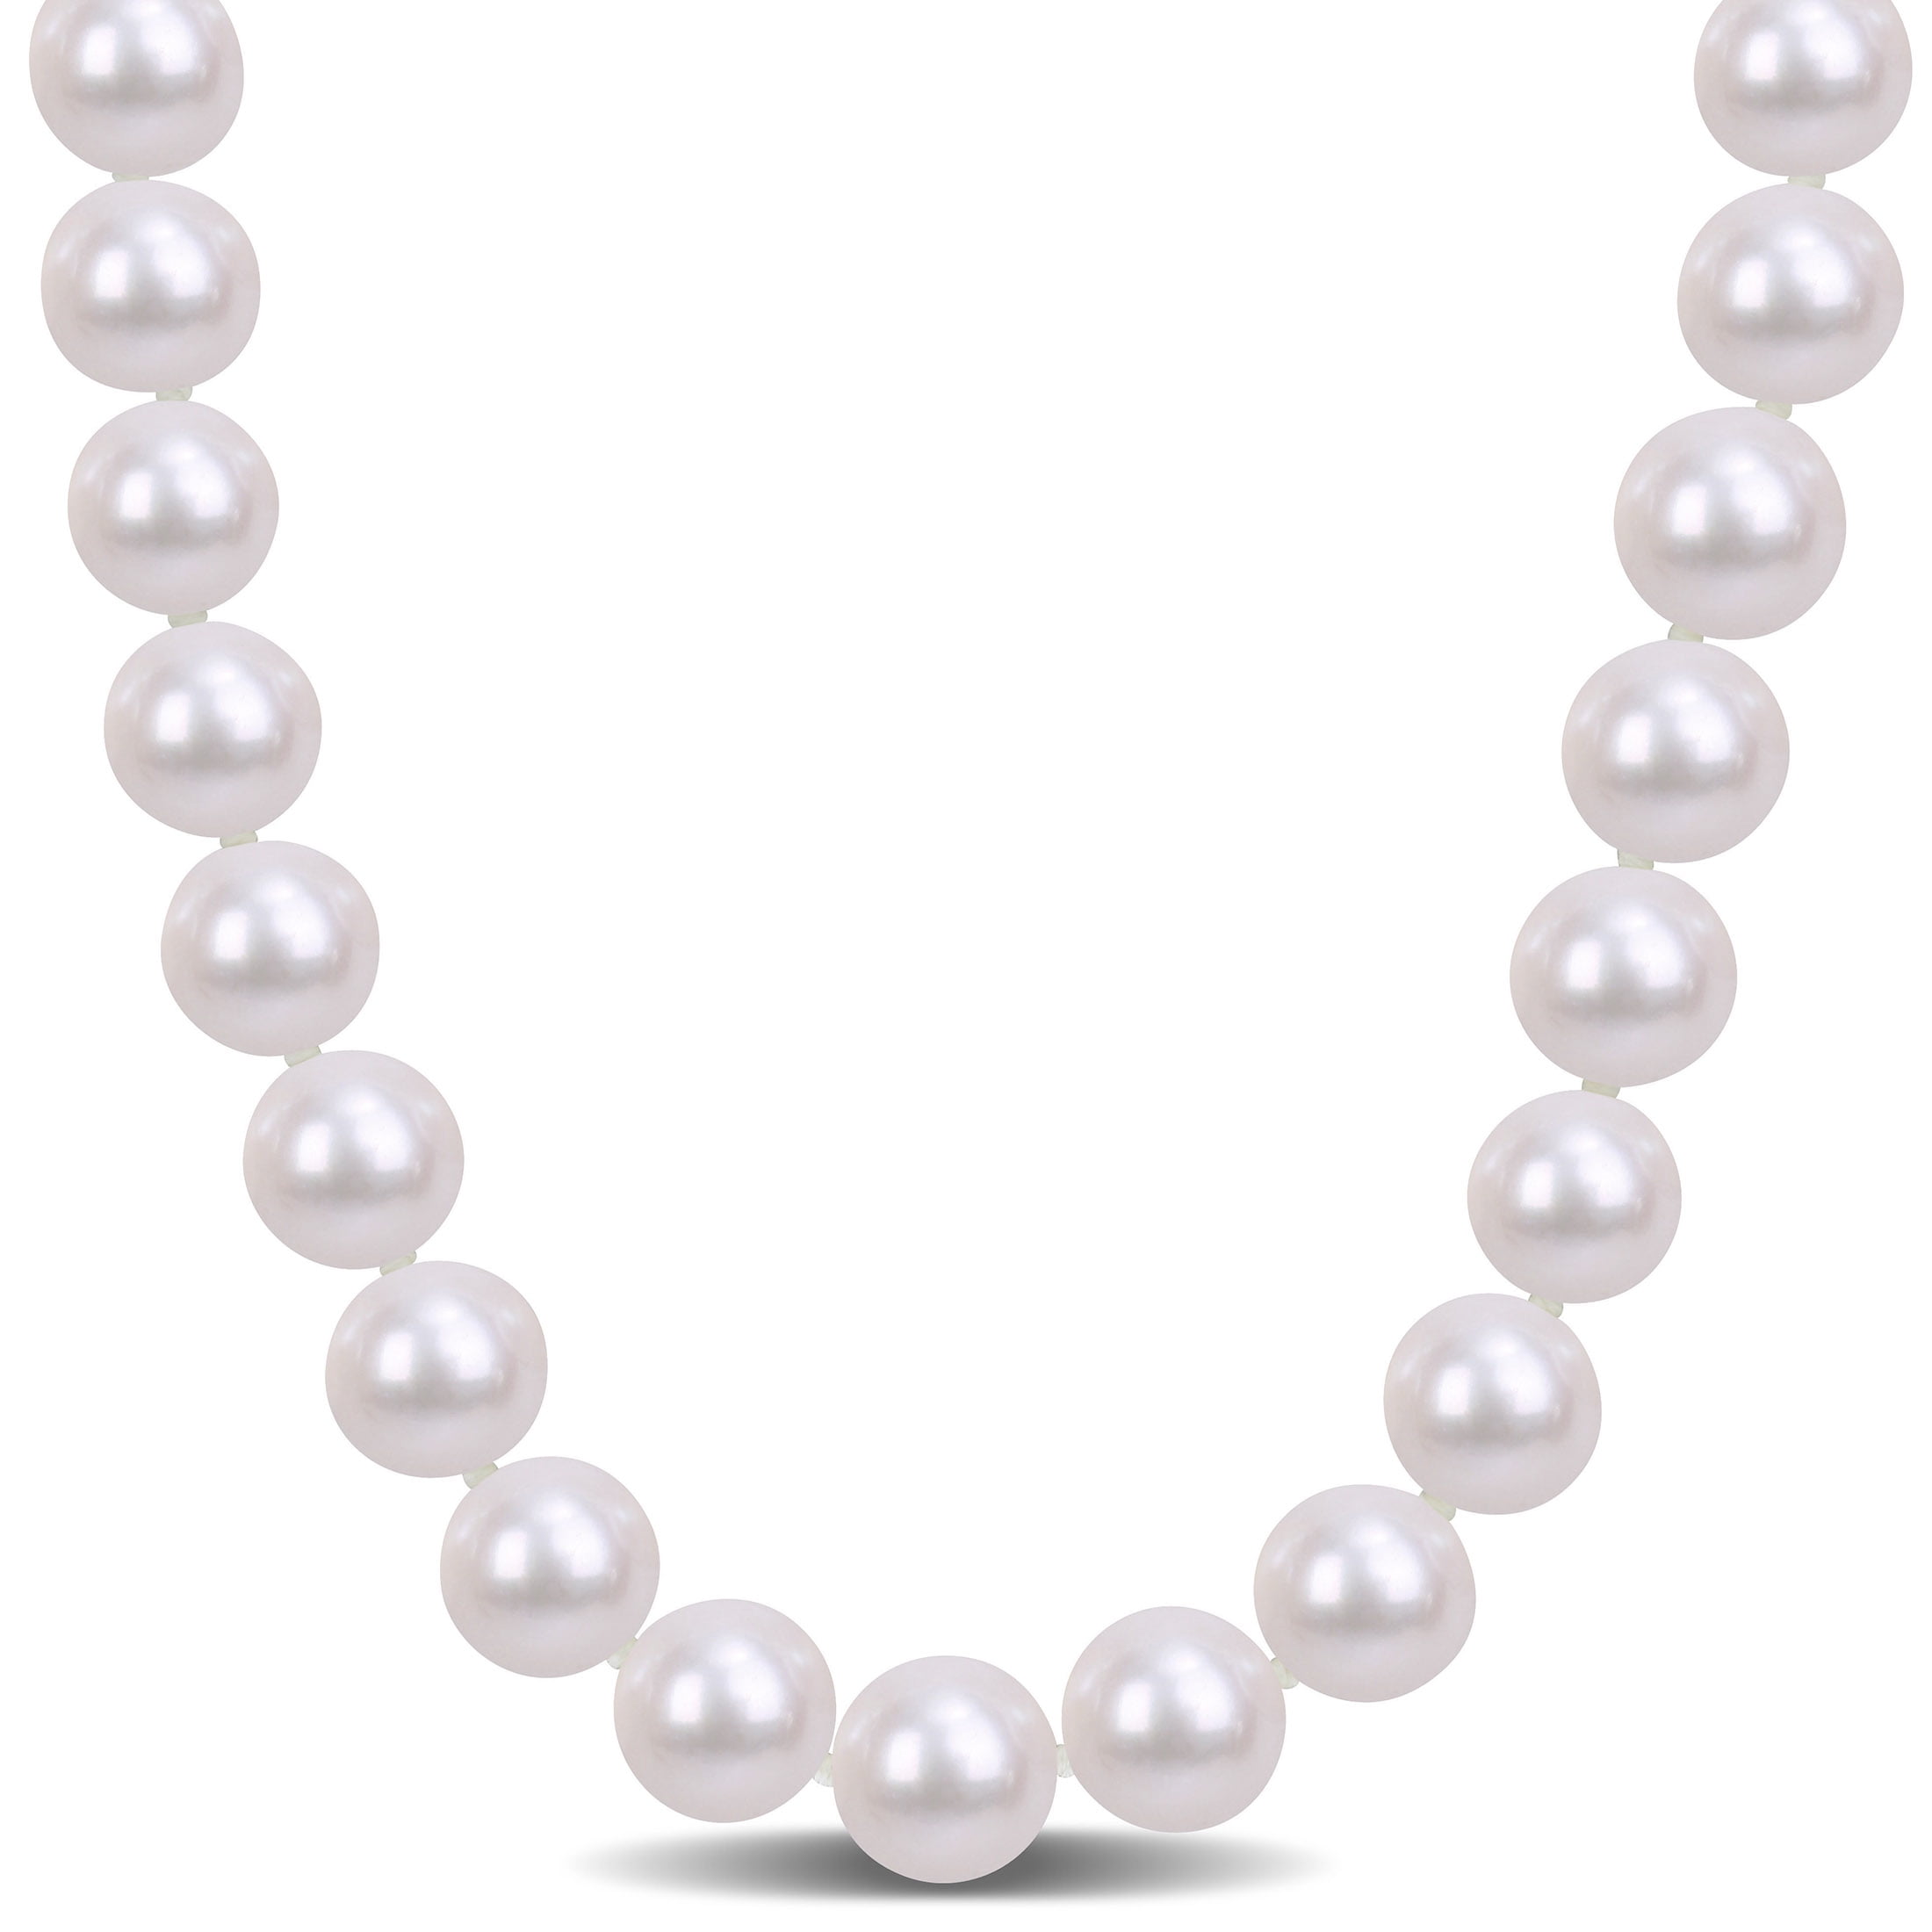 JYX Pearl South Seashell Pearl Necklace 12mm Sky Blue Big Round Beads For Women Jewelry Gift 18''